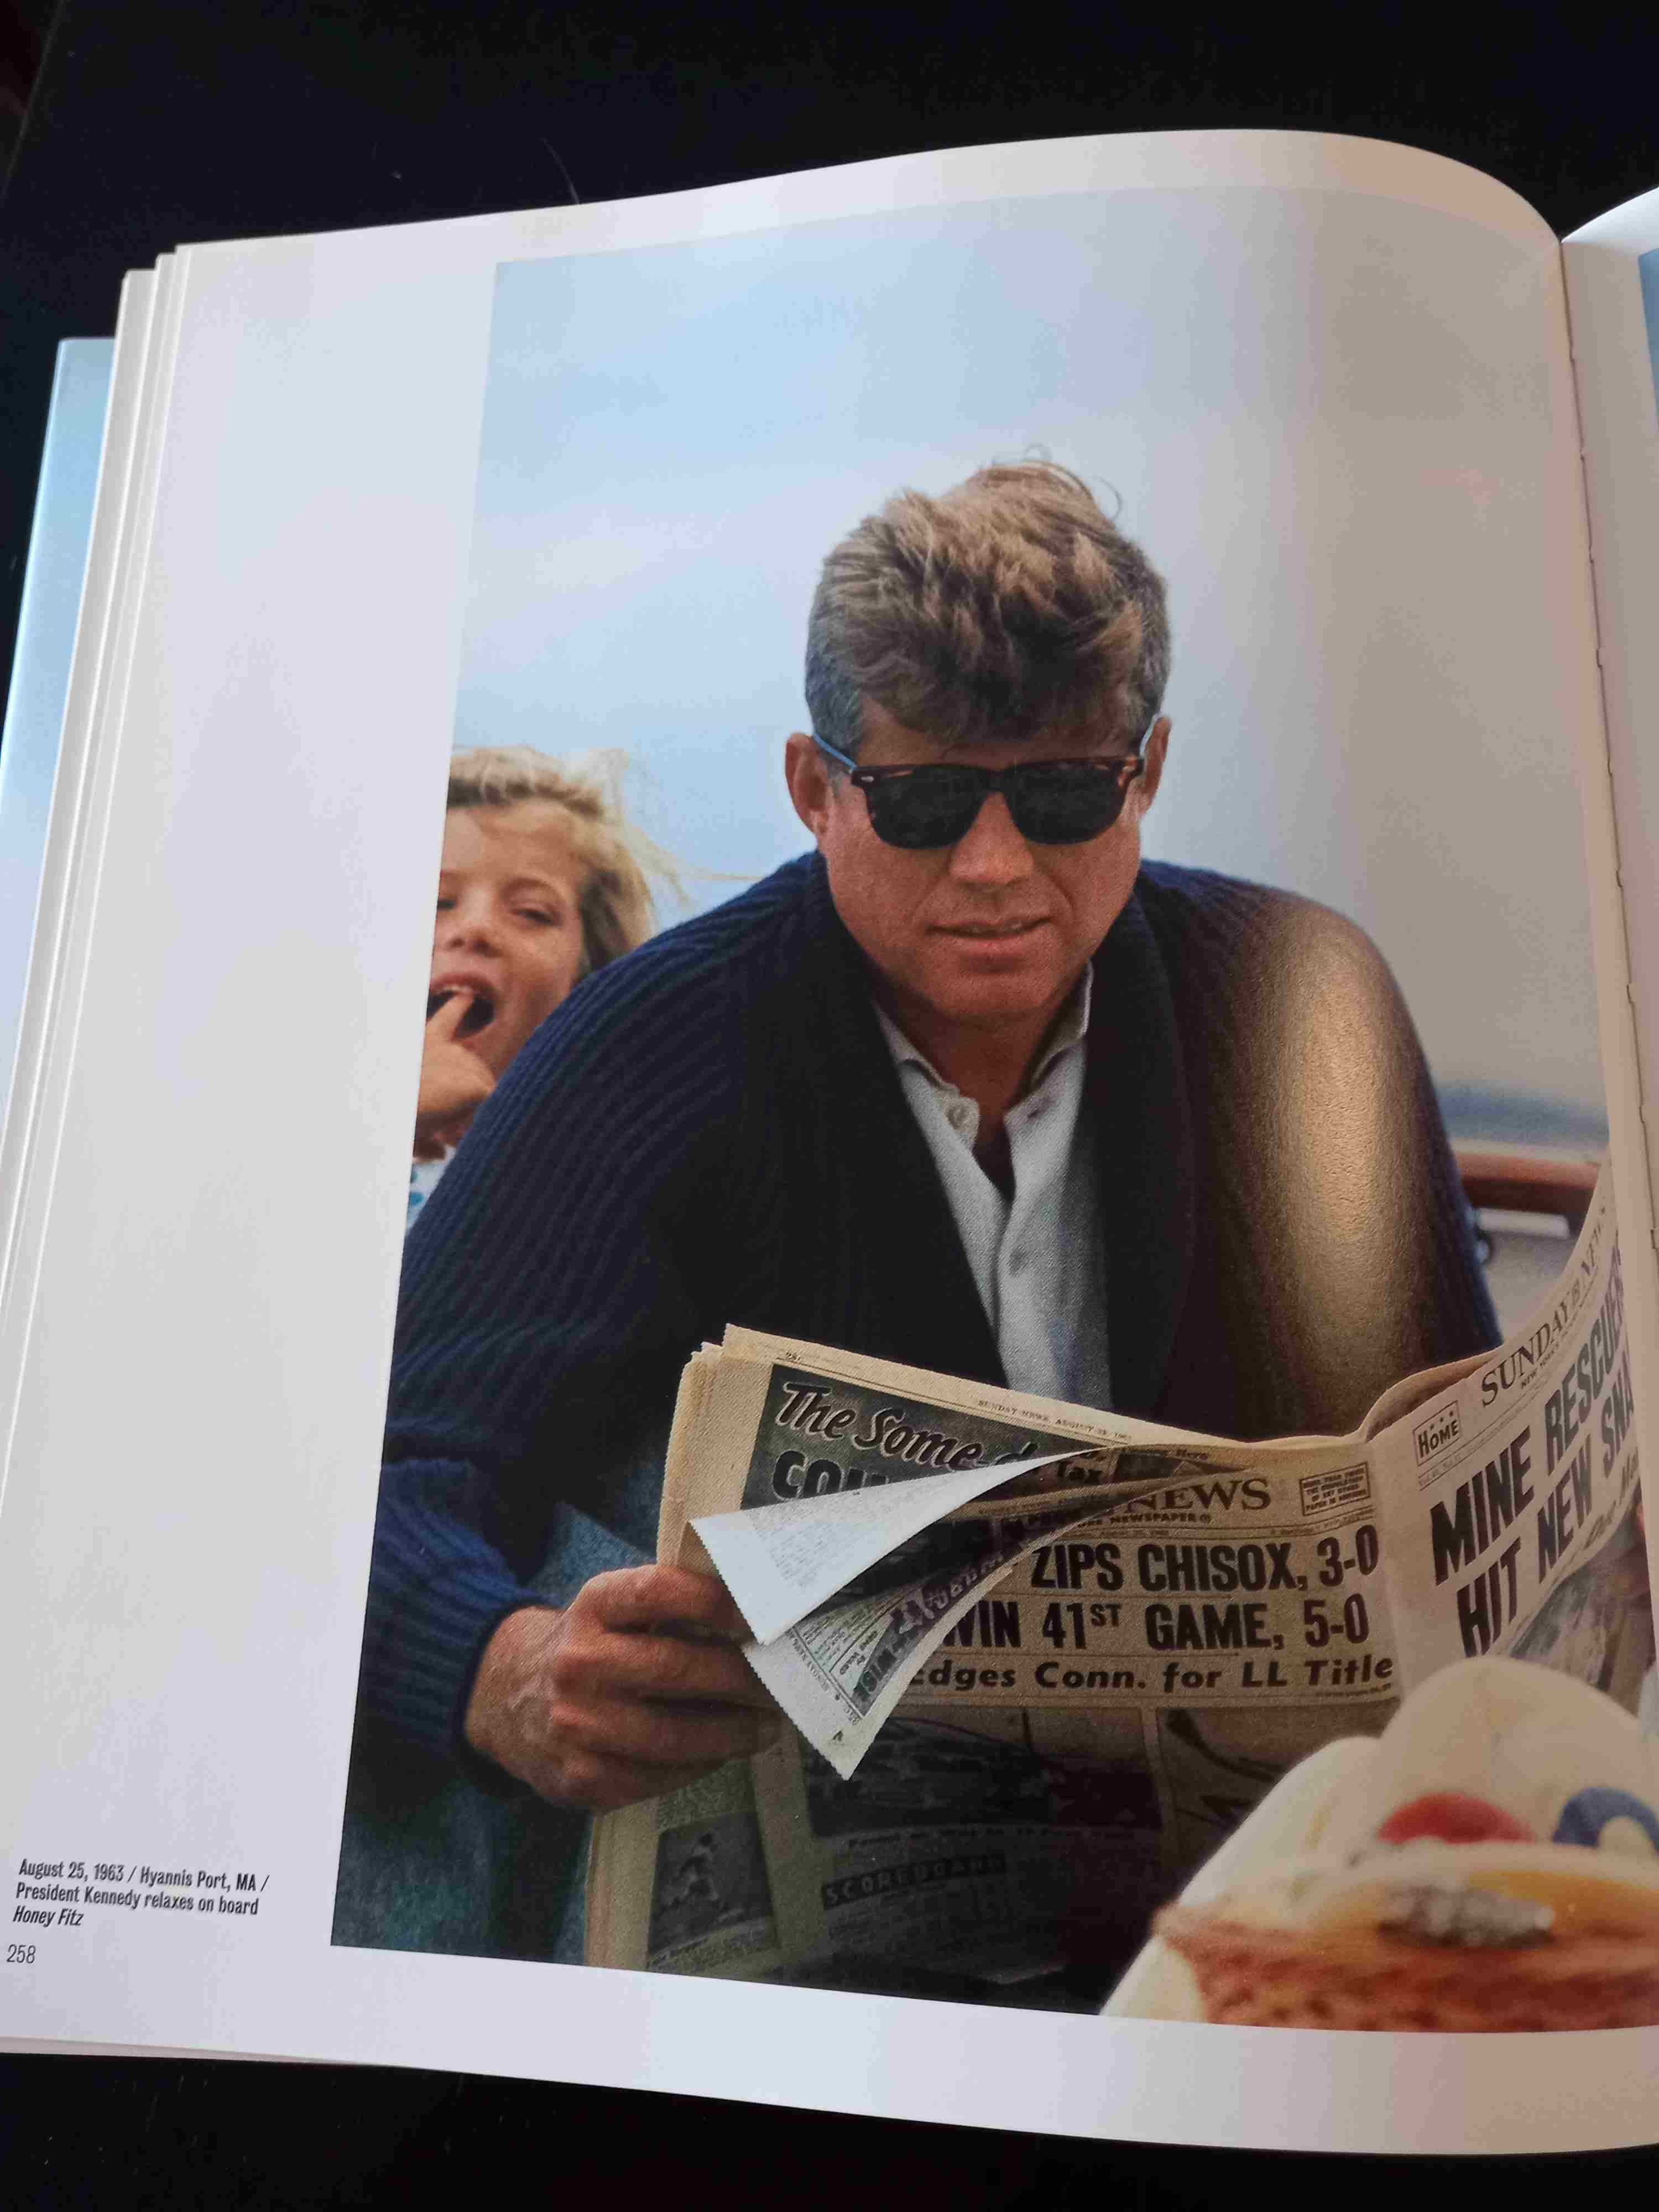 John Fitzgerald Kennedy - A Life in Pictures